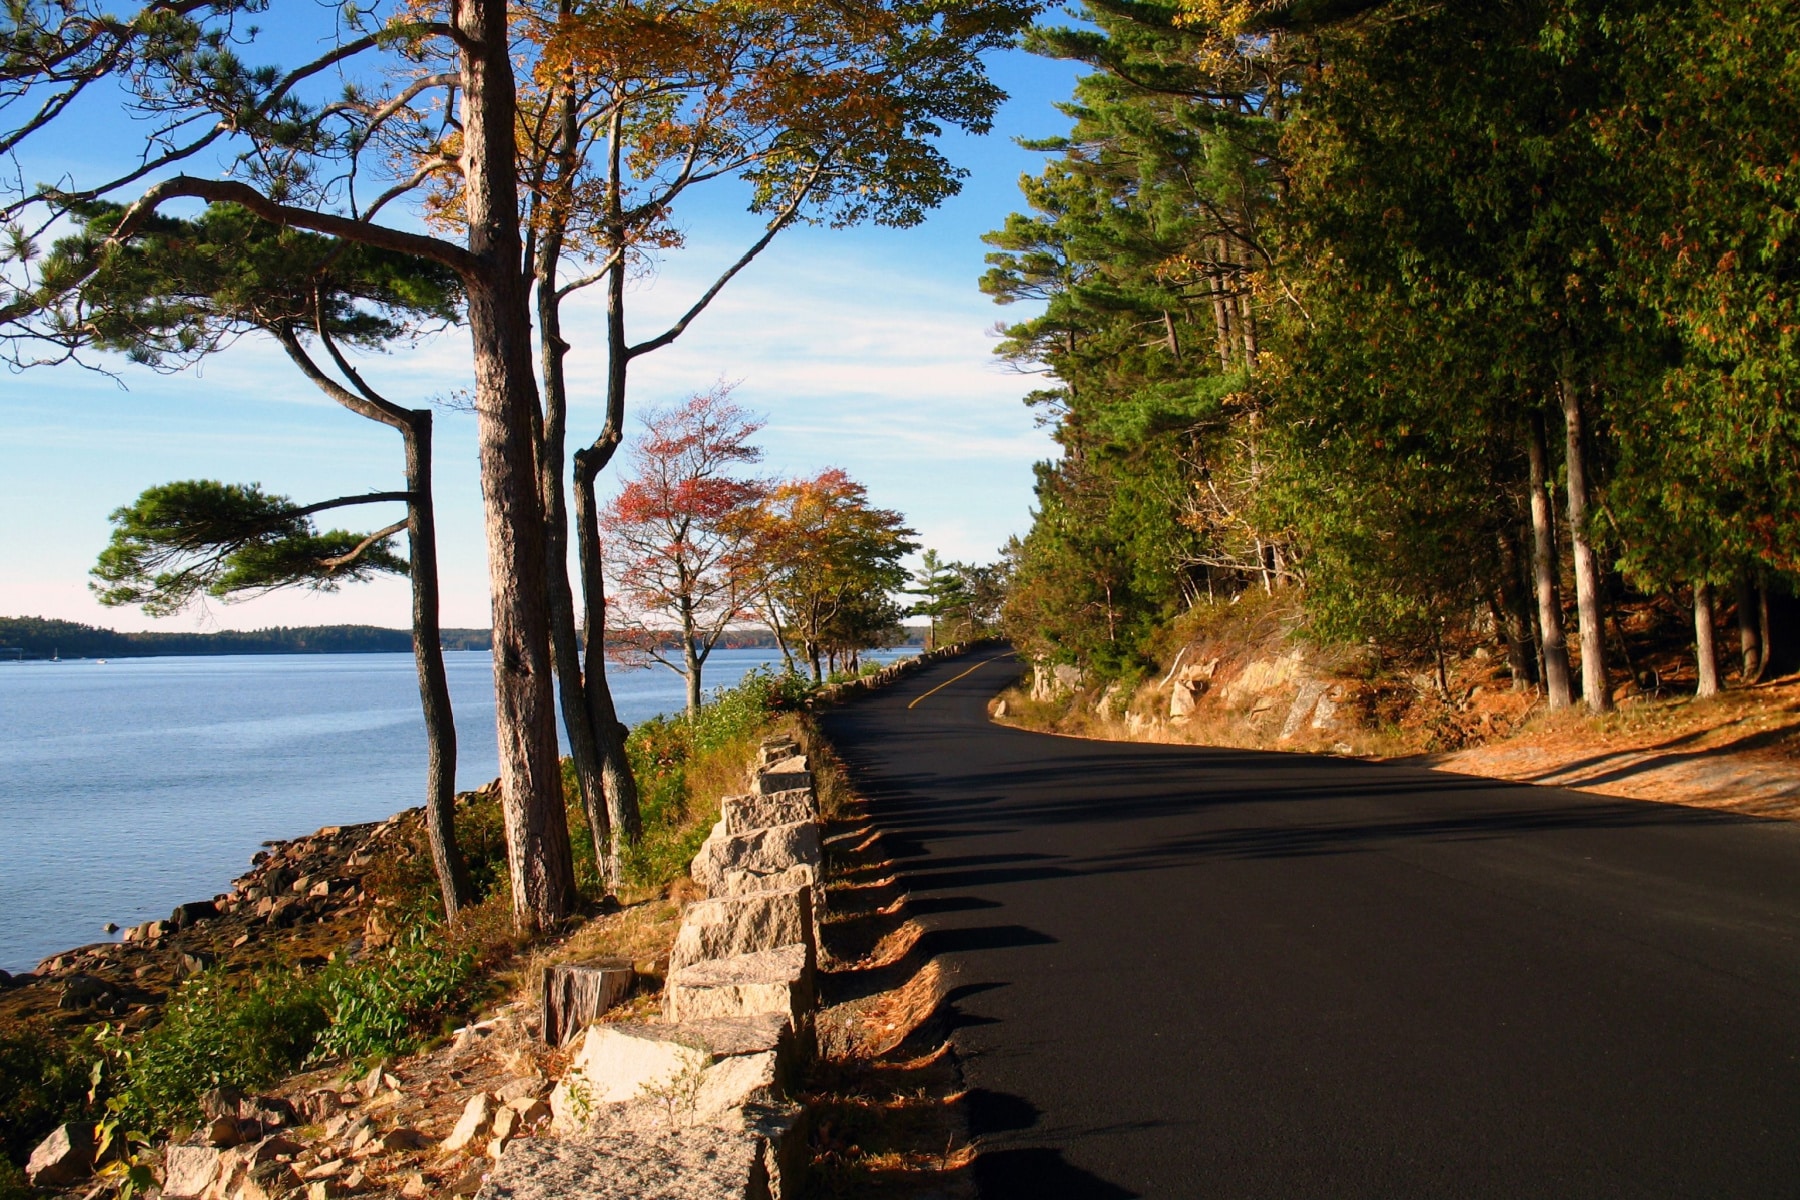 Sargeant Road in Northwest Harbor weaves the edge of Somes Sound on Mount Desert Island, Maine.